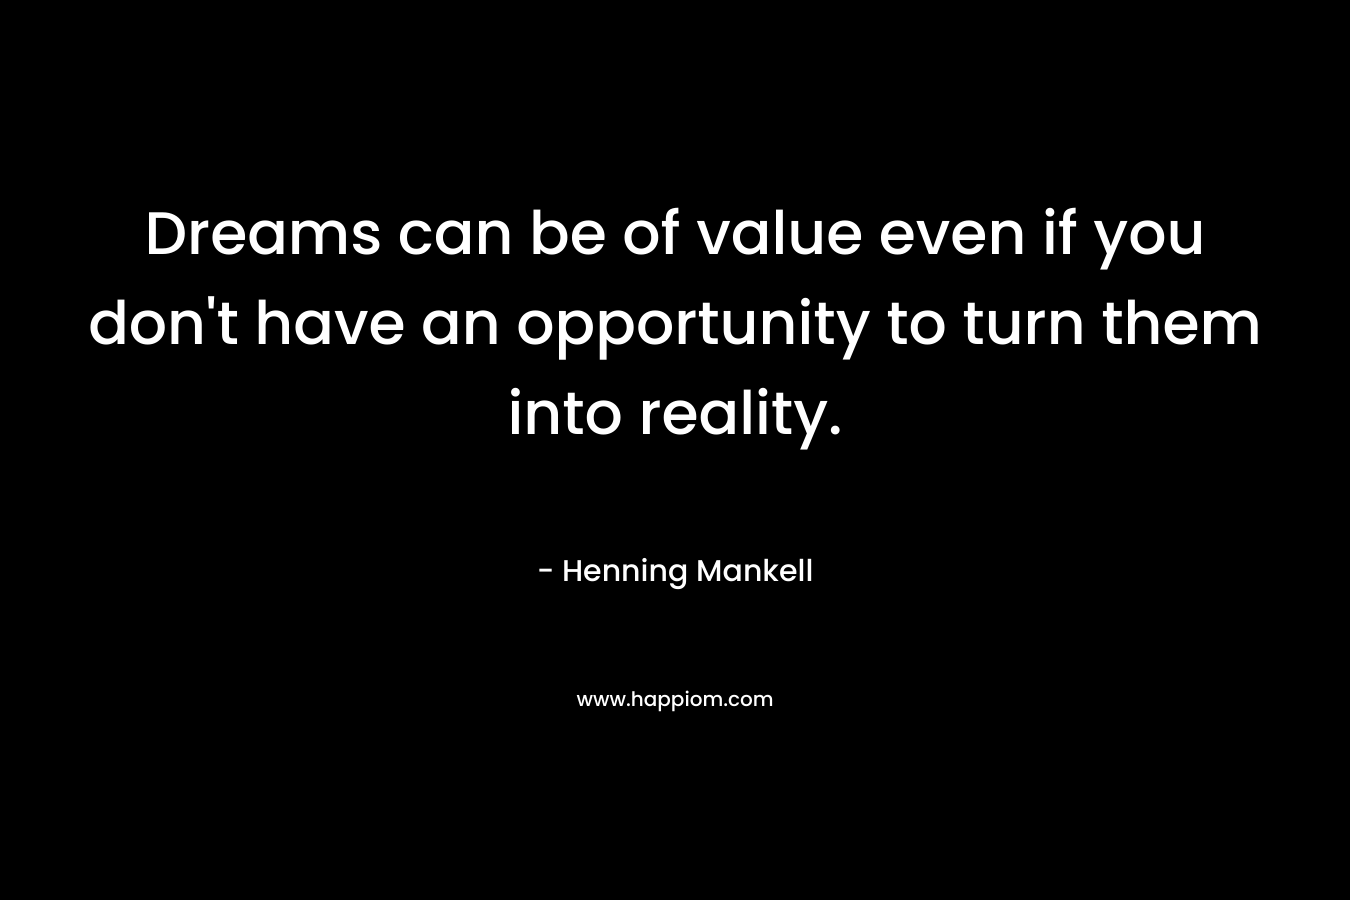 Dreams can be of value even if you don't have an opportunity to turn them into reality.